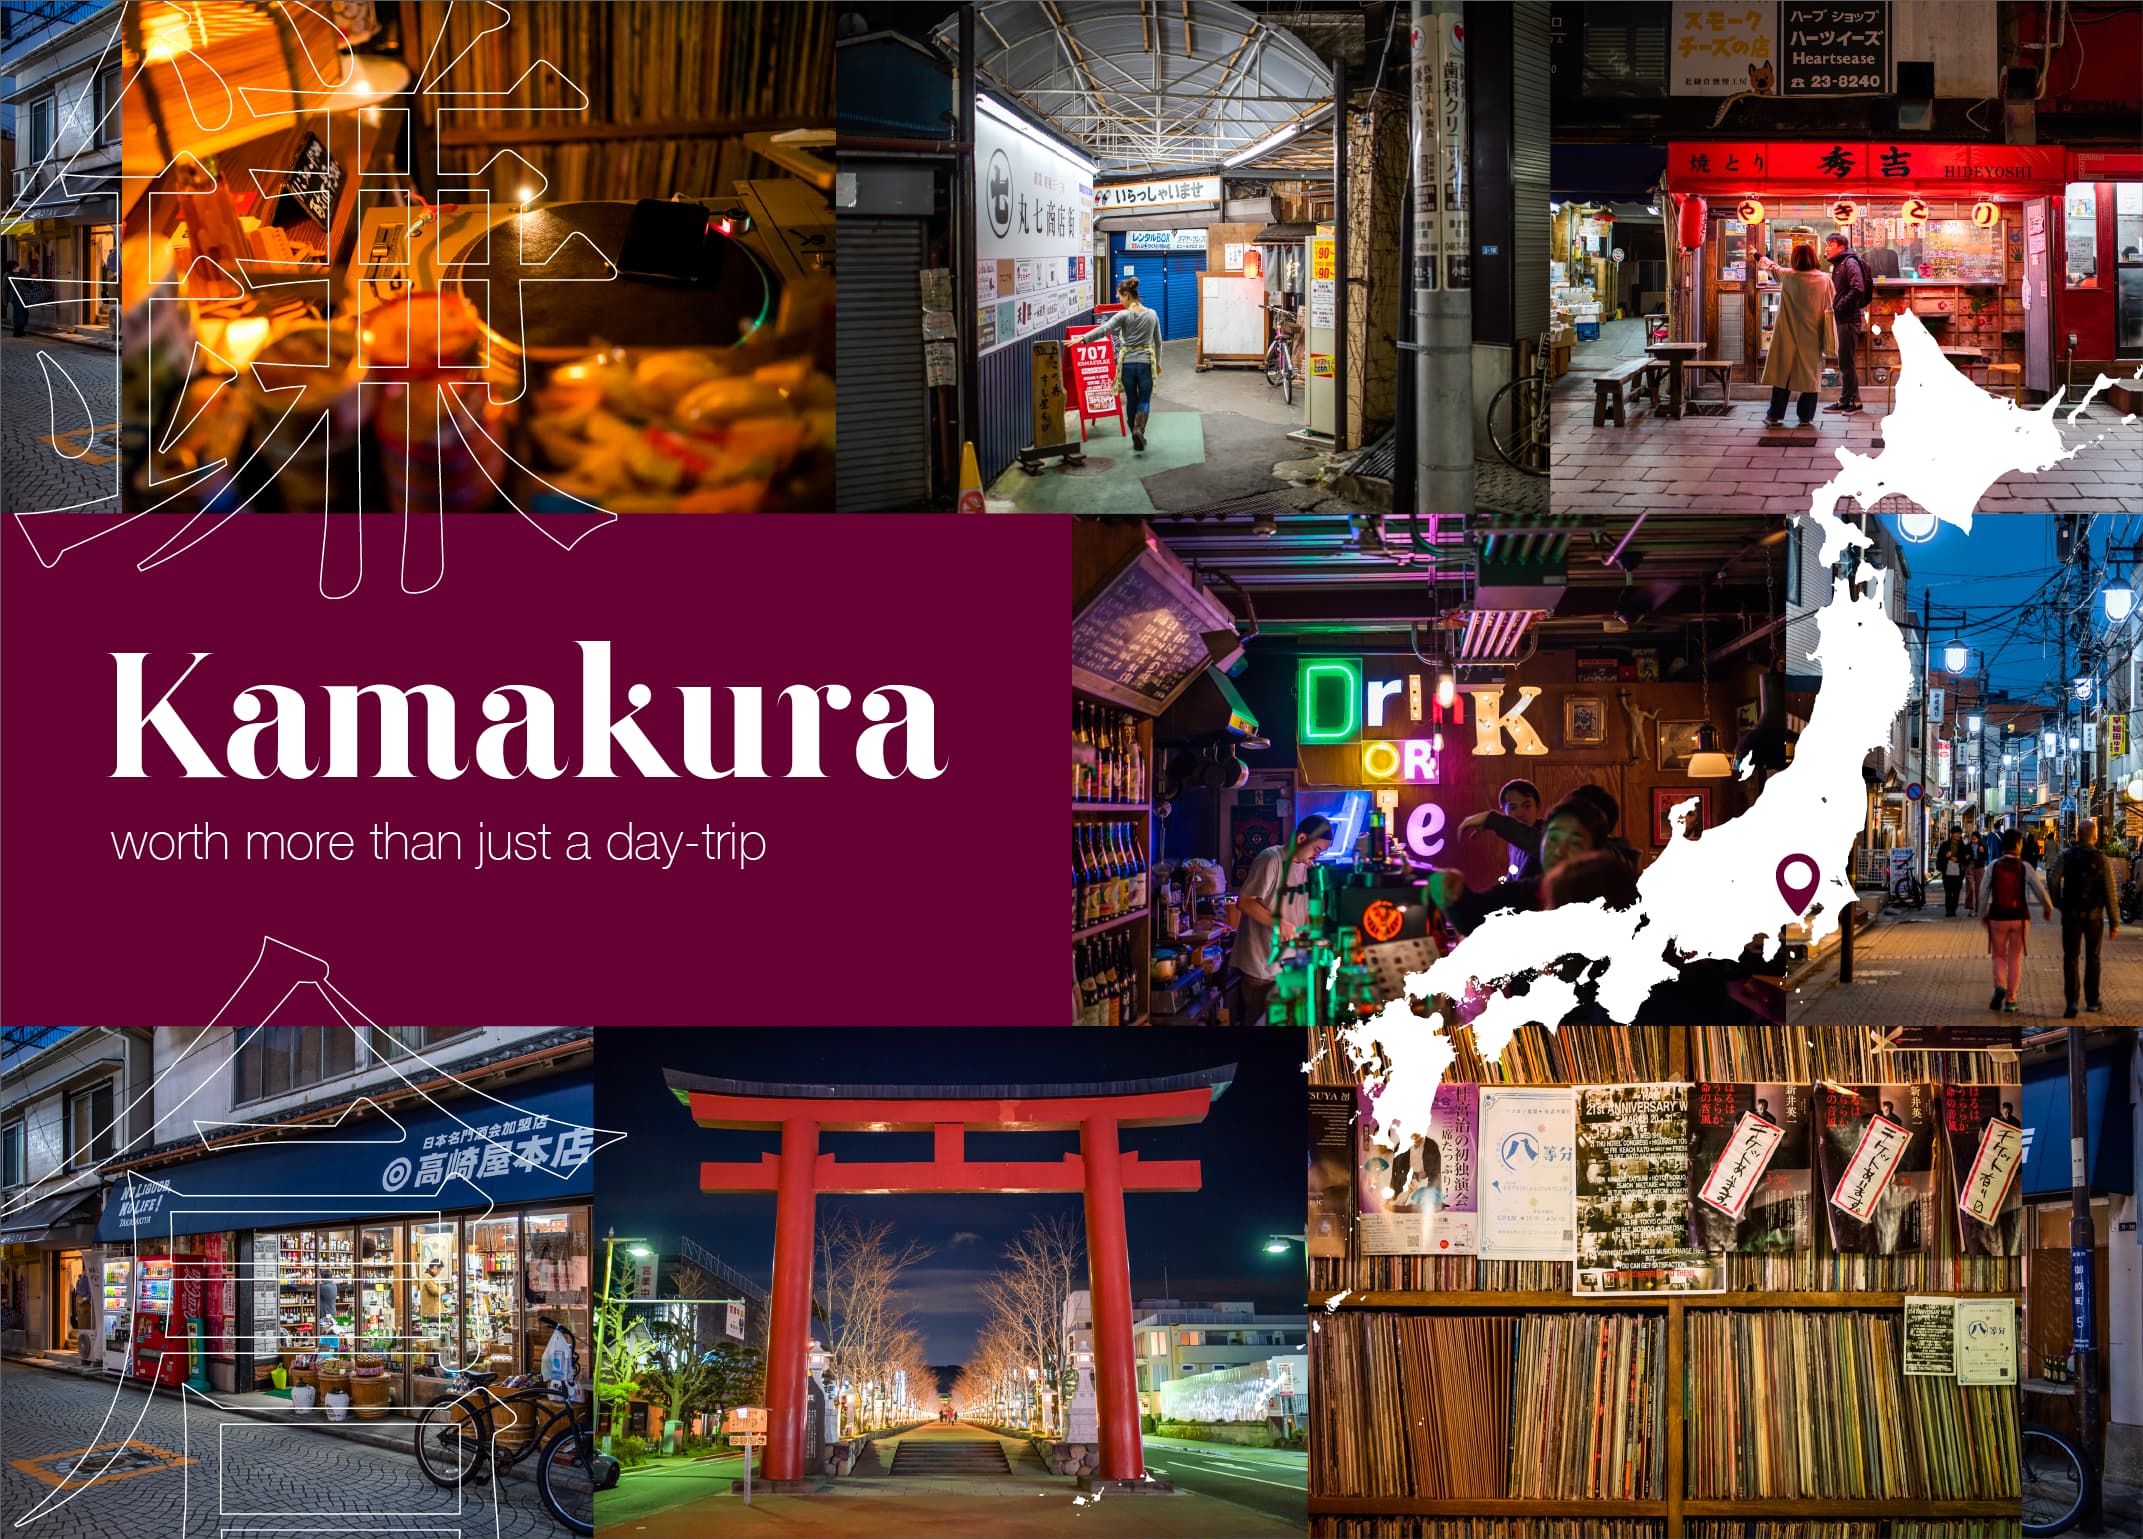 Kamakura - worth more than just a day-trip